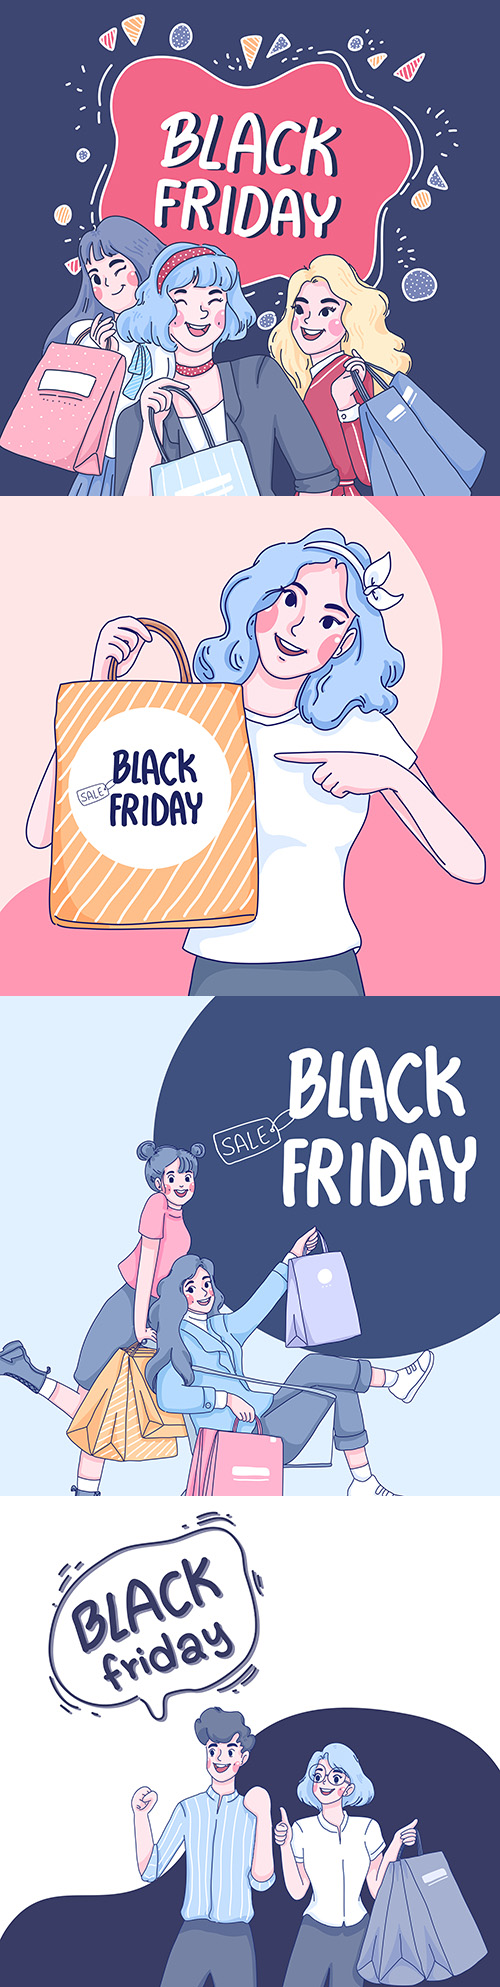 Black Friday and sale special girls with purchases illustration
